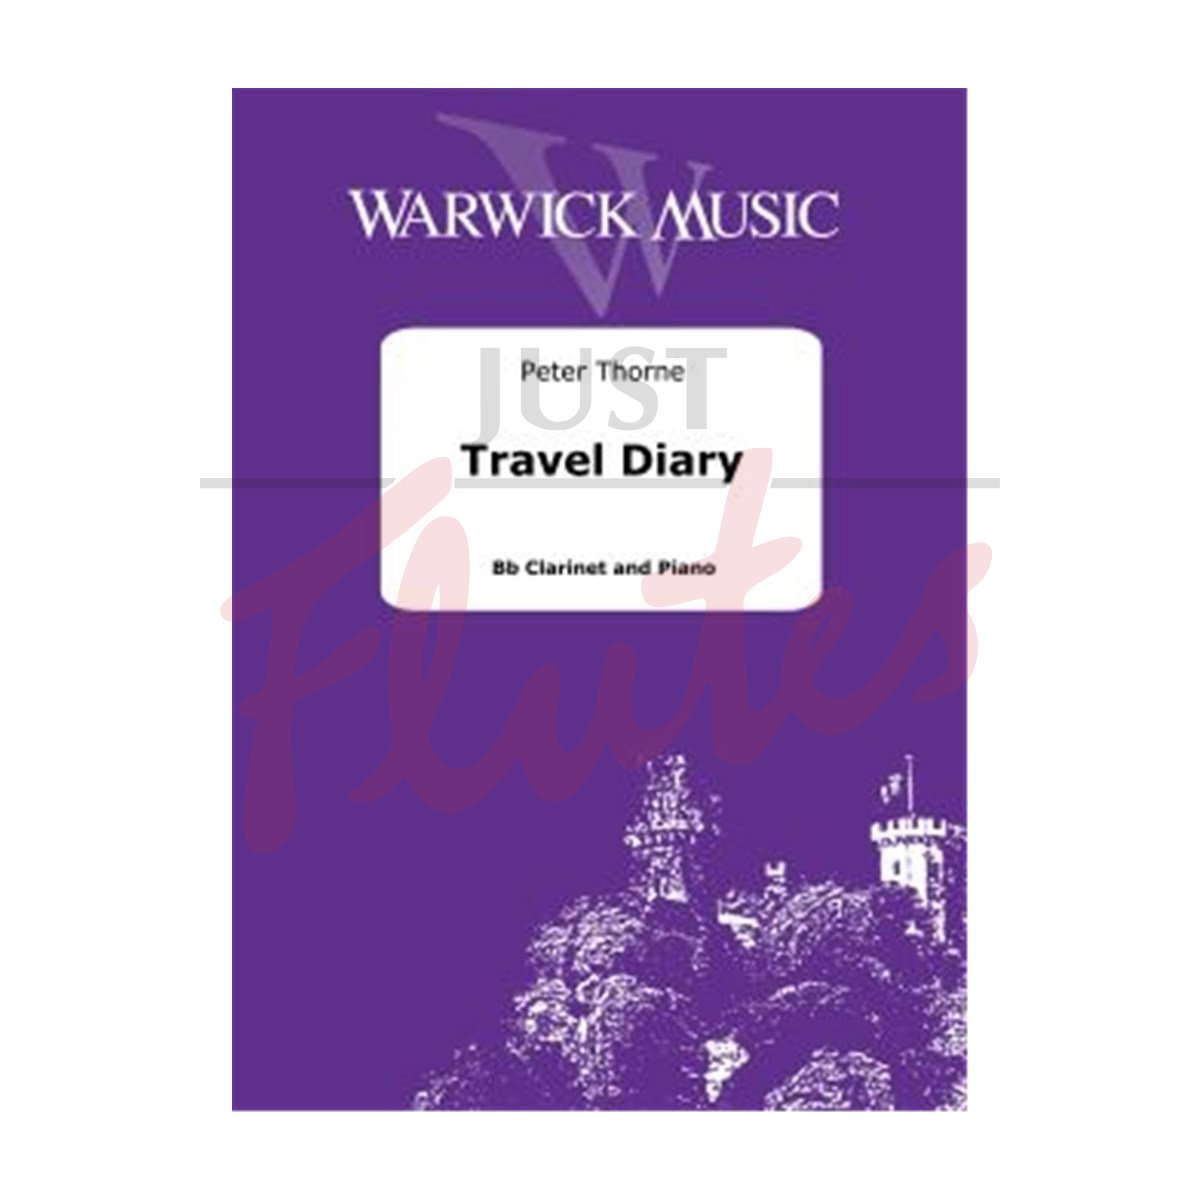 Travel Dairy for Clarinet and Piano